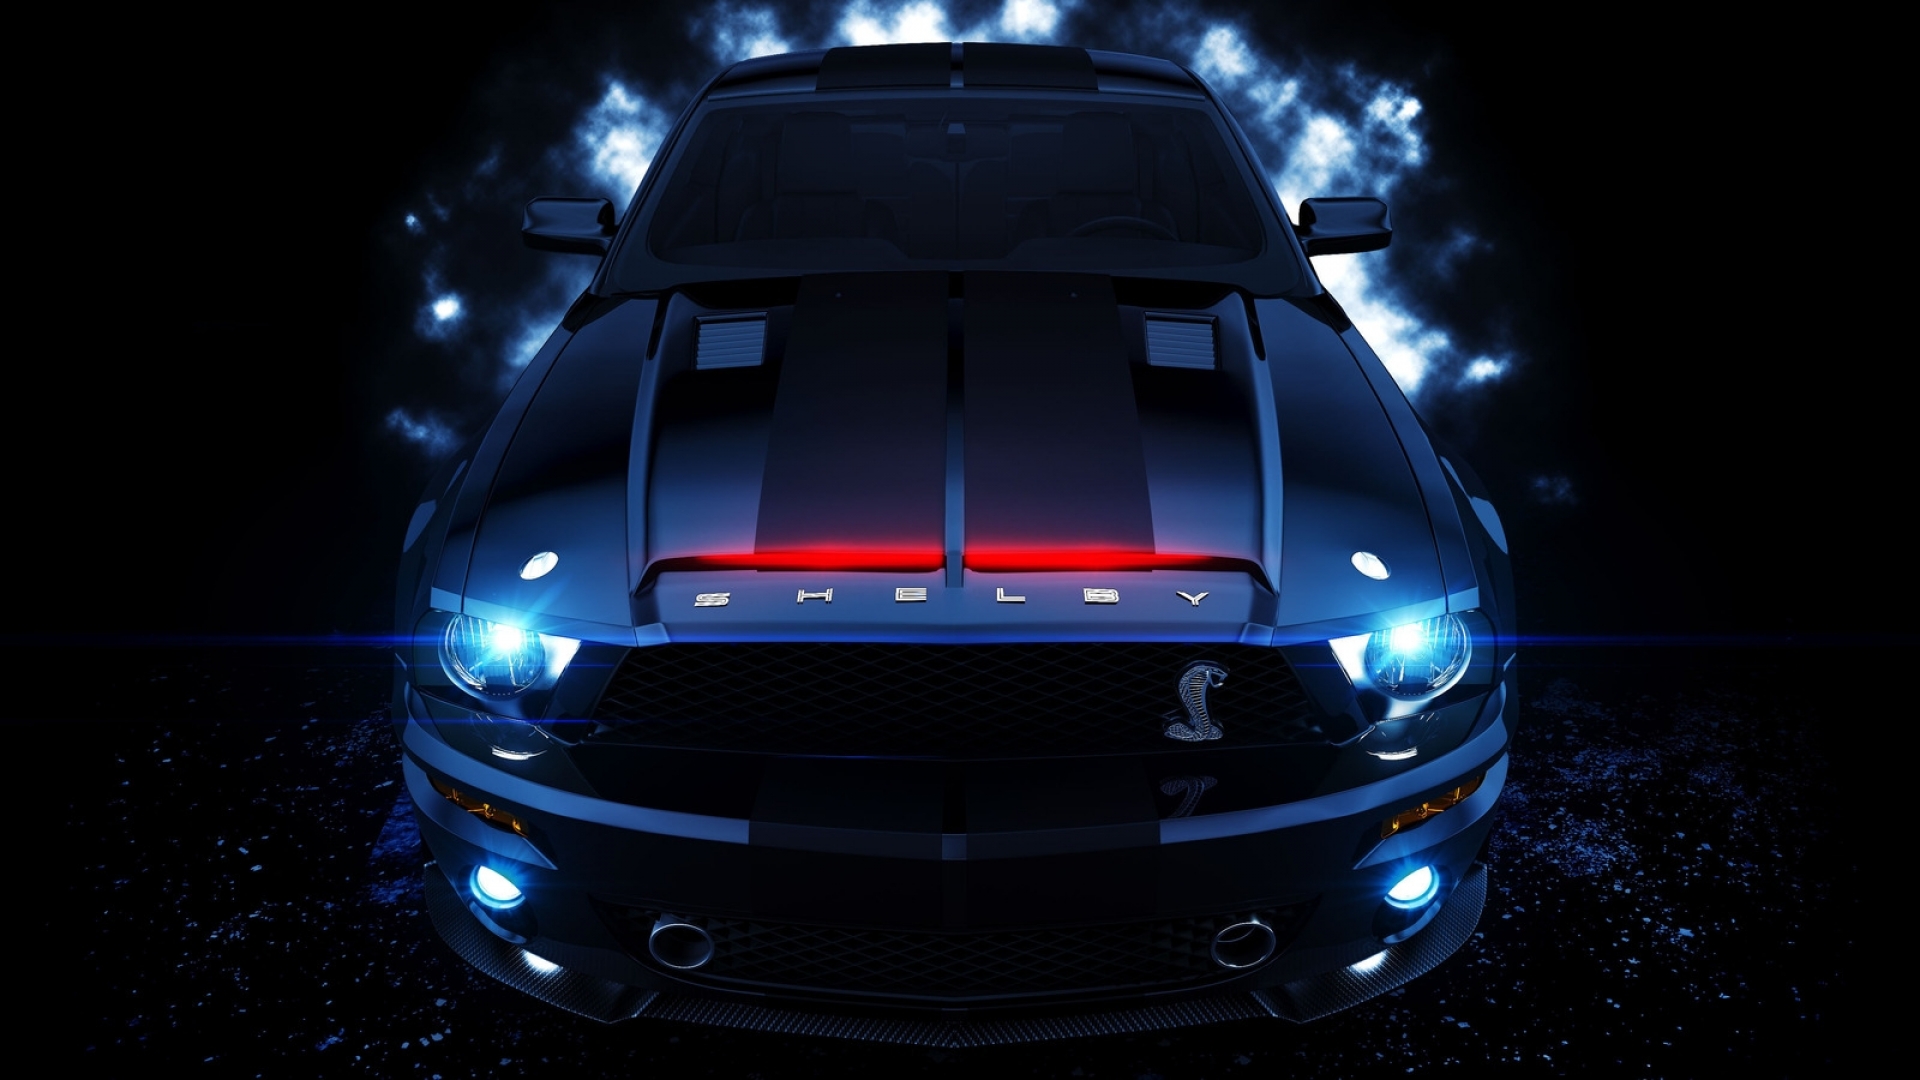 Ford Mustang Shelby Gt Muscle Cars Wallpaper Background